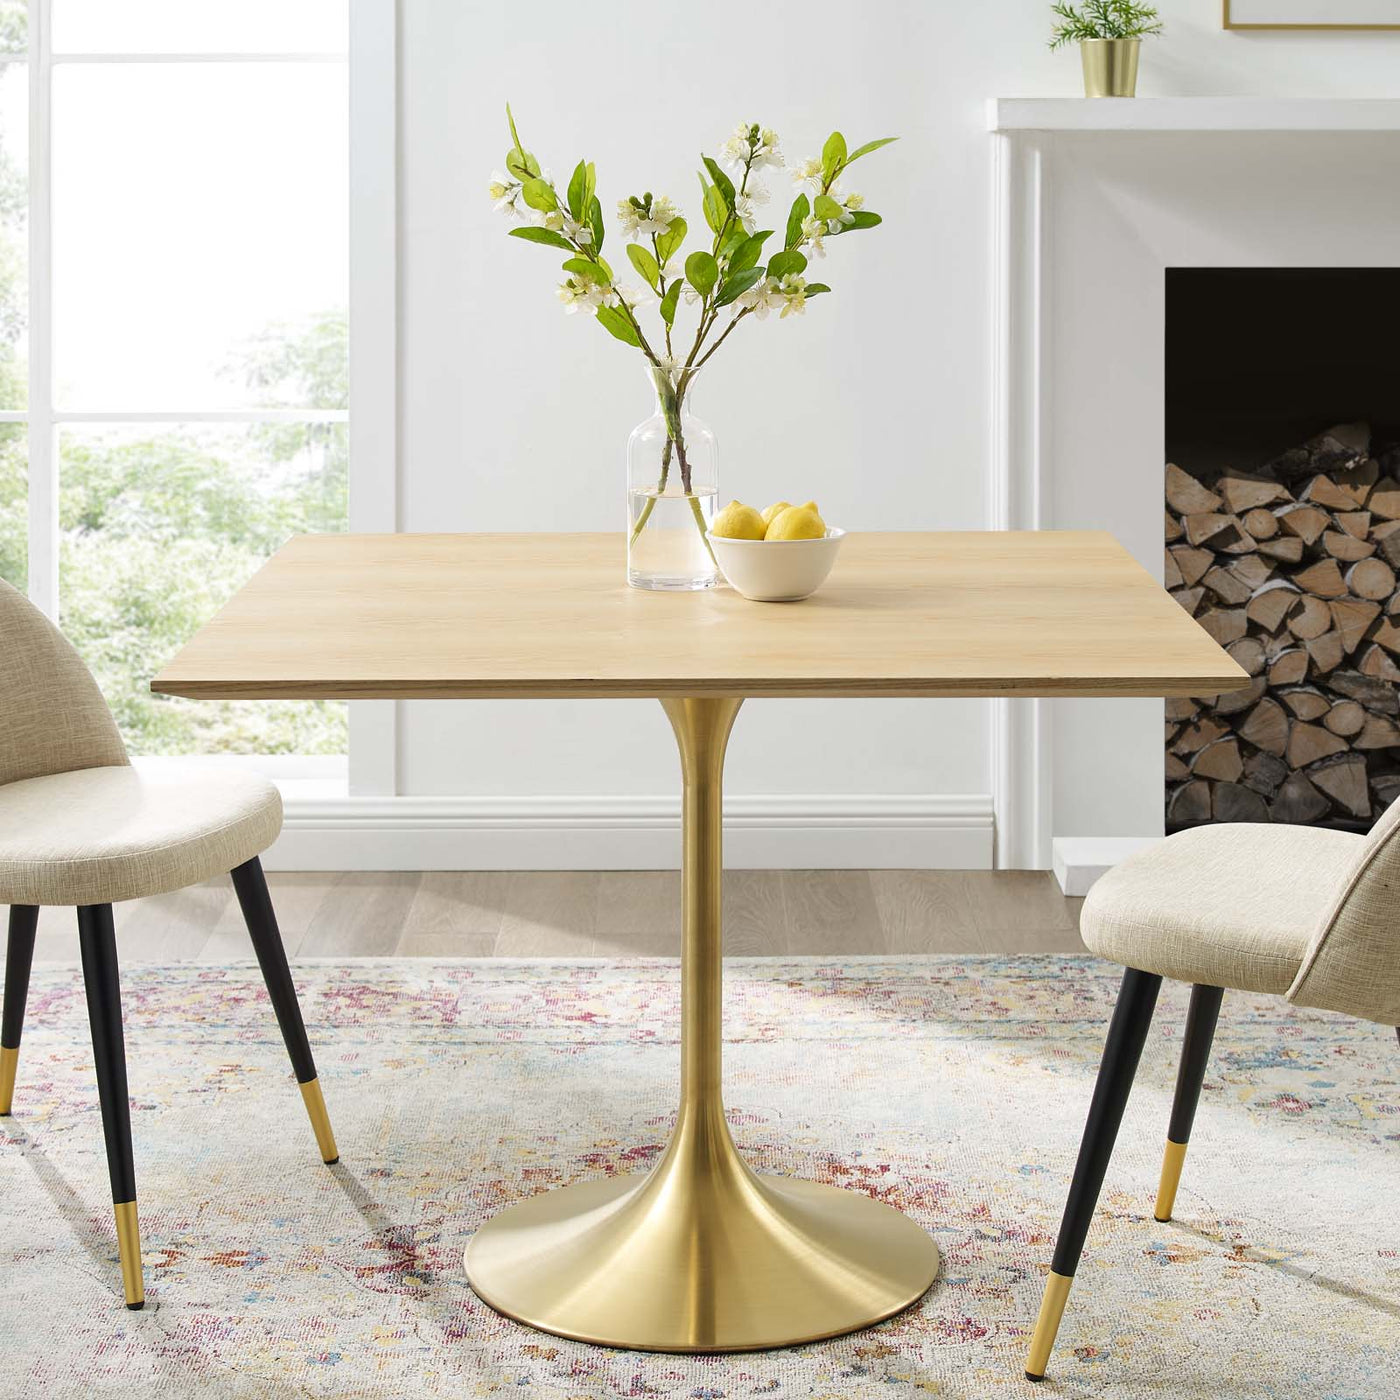 Lippa 36" Square Wood Dining Table